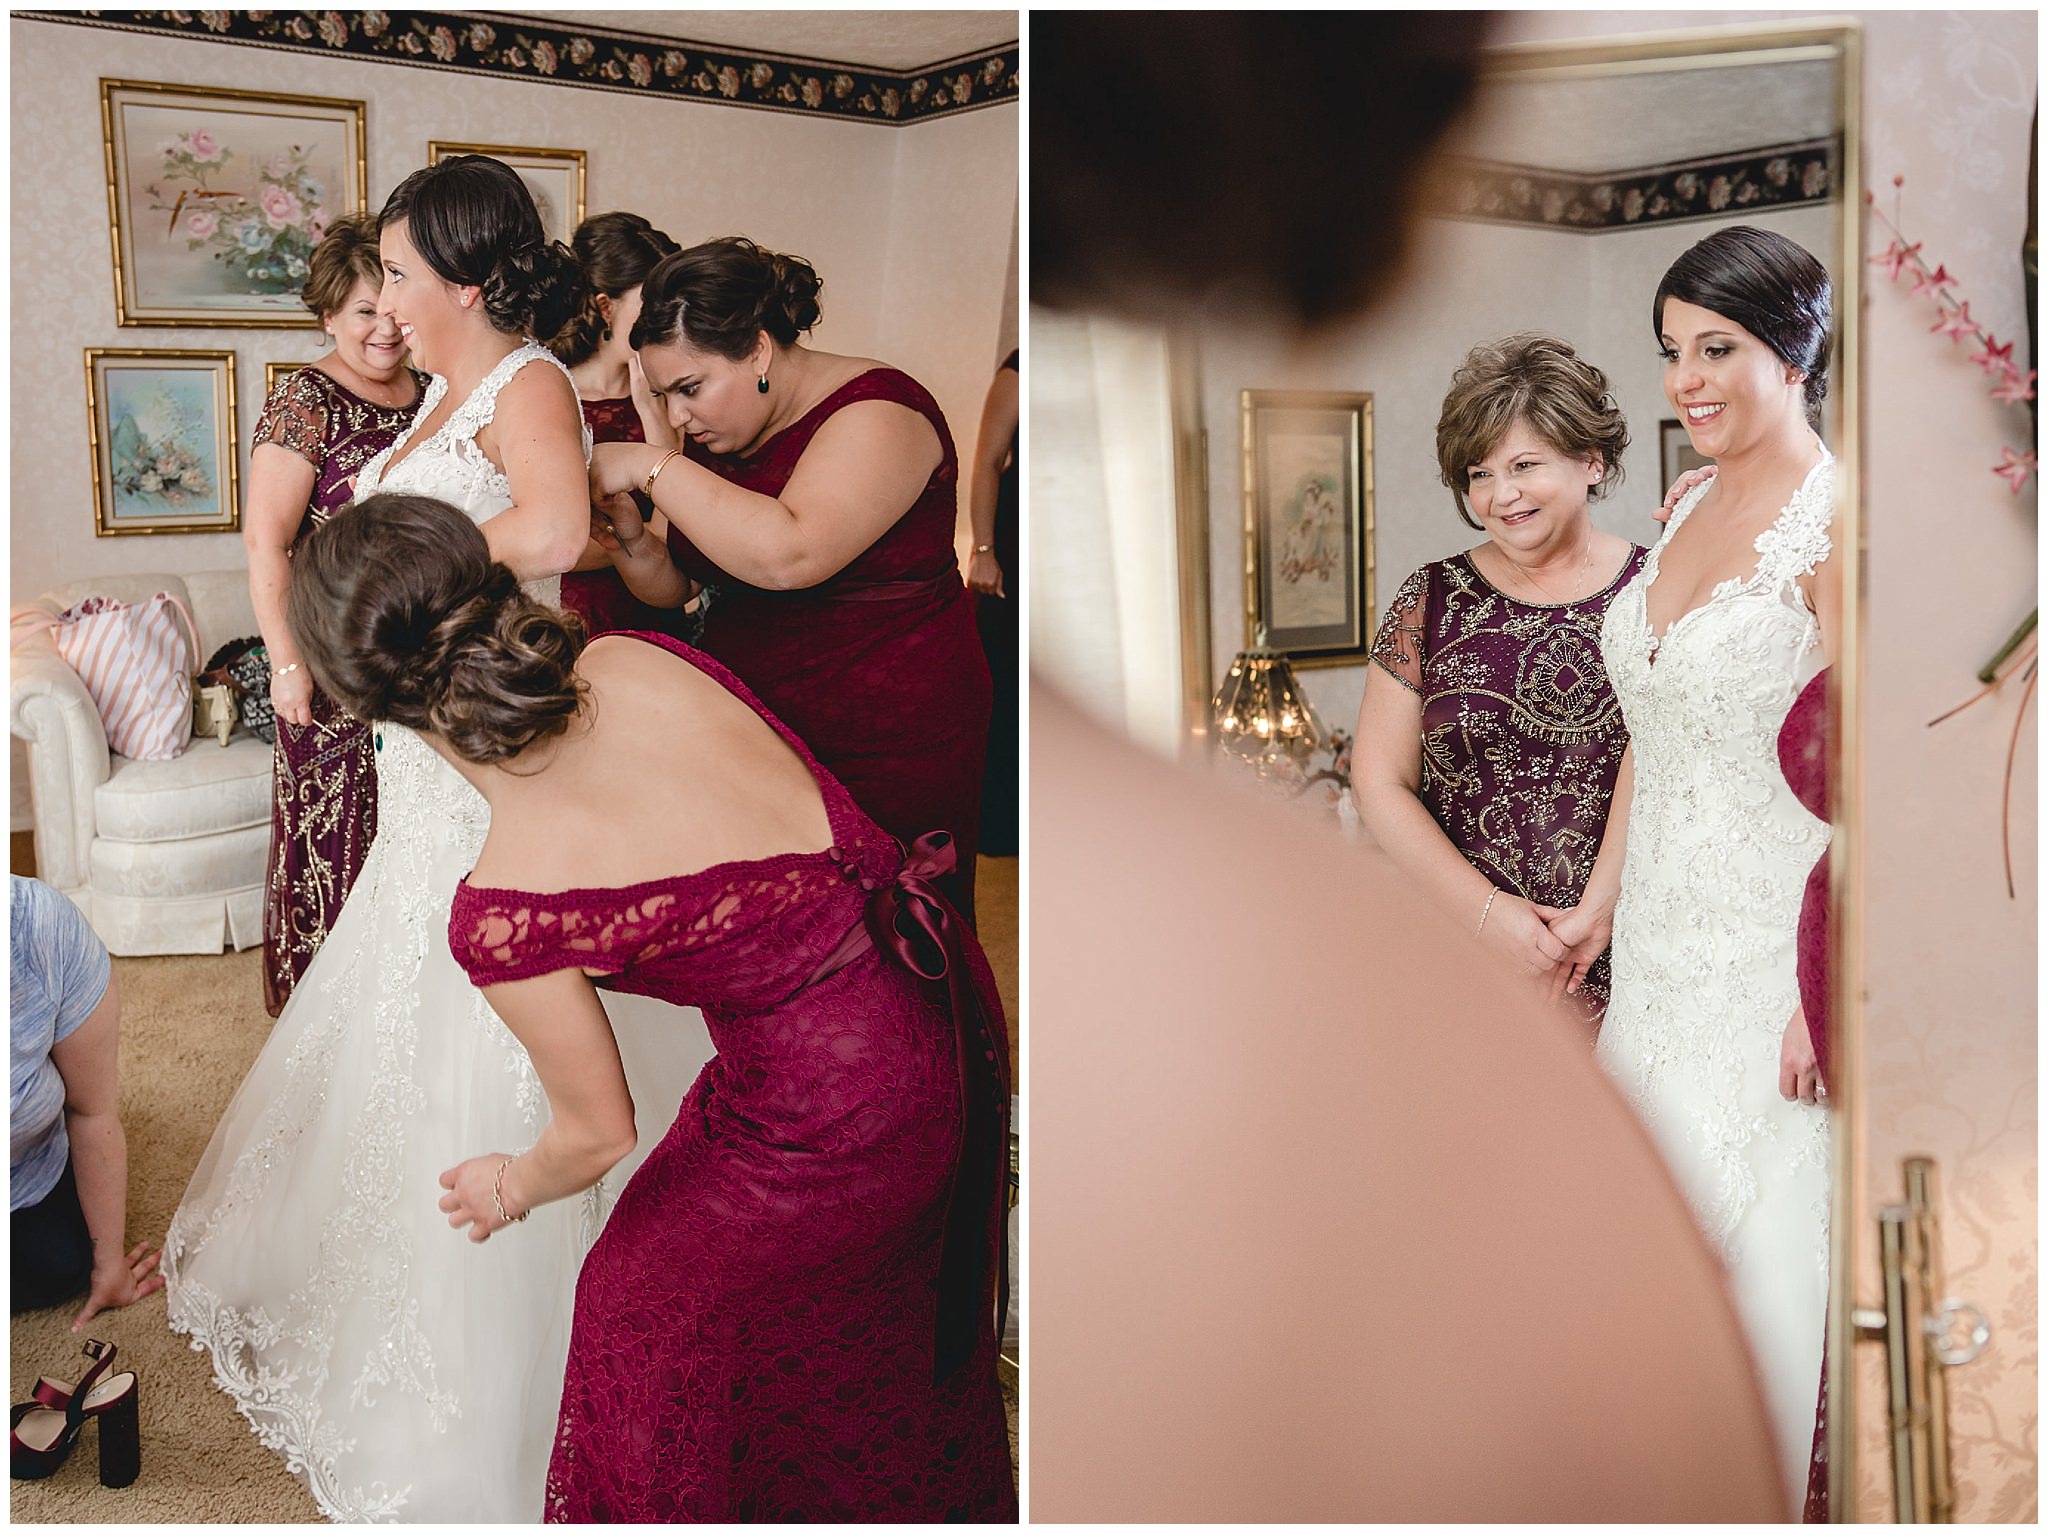 Mother of the bride smiles as bridesmaids help her into her dress